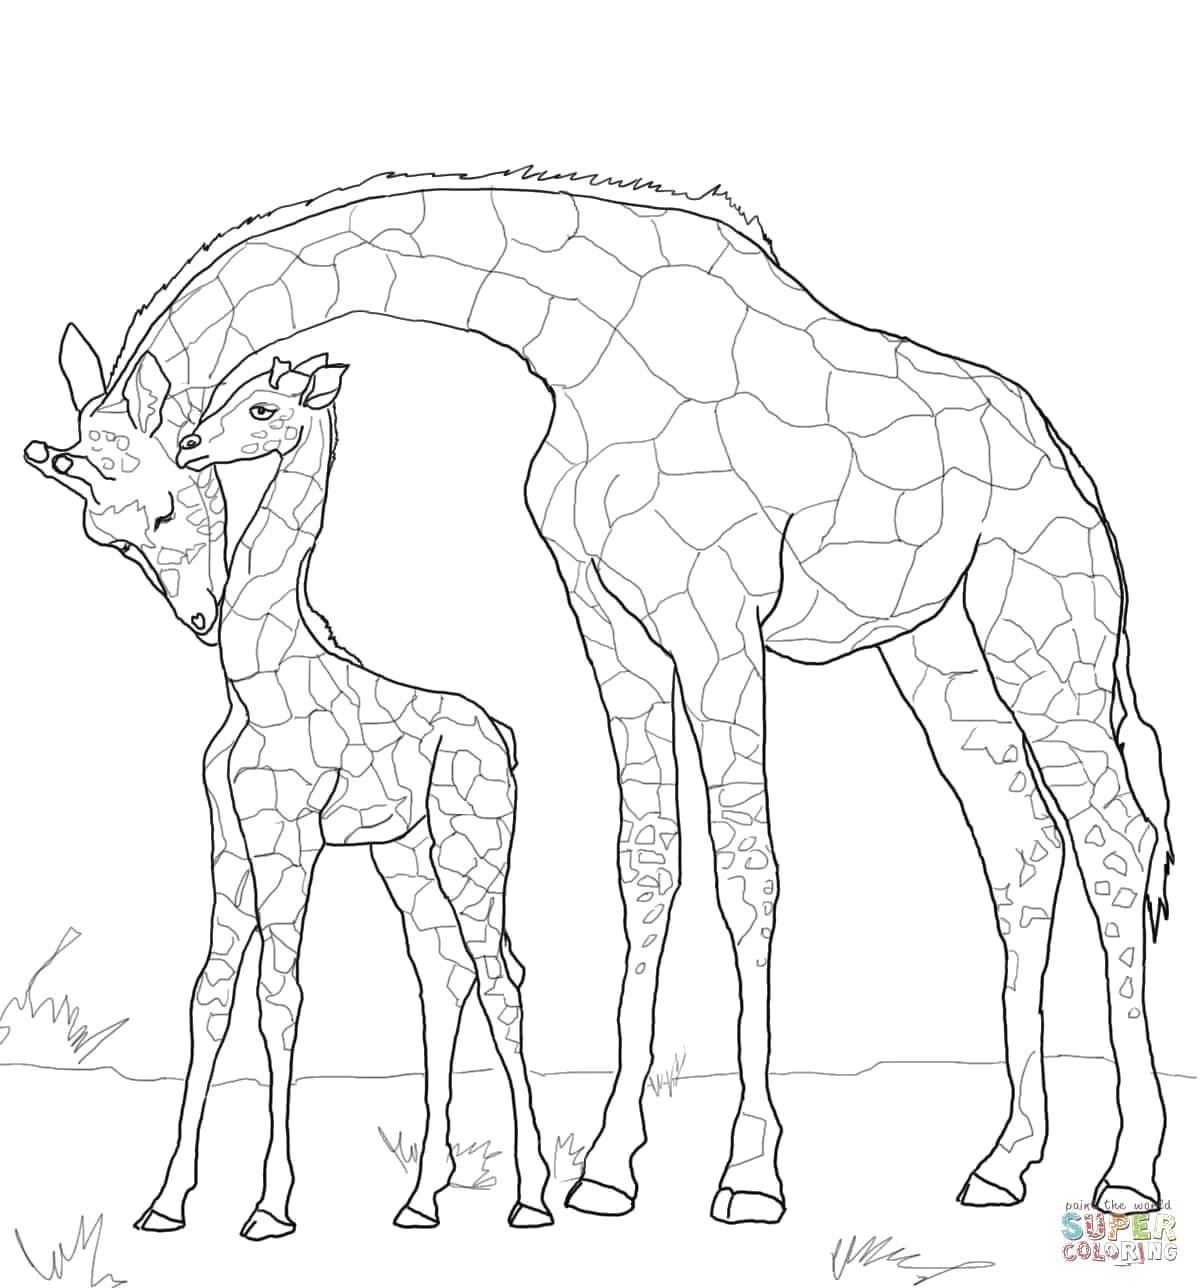 Coloring Mother giraffe with calf. Category wild animals. Tags:  Animals, giraffe.